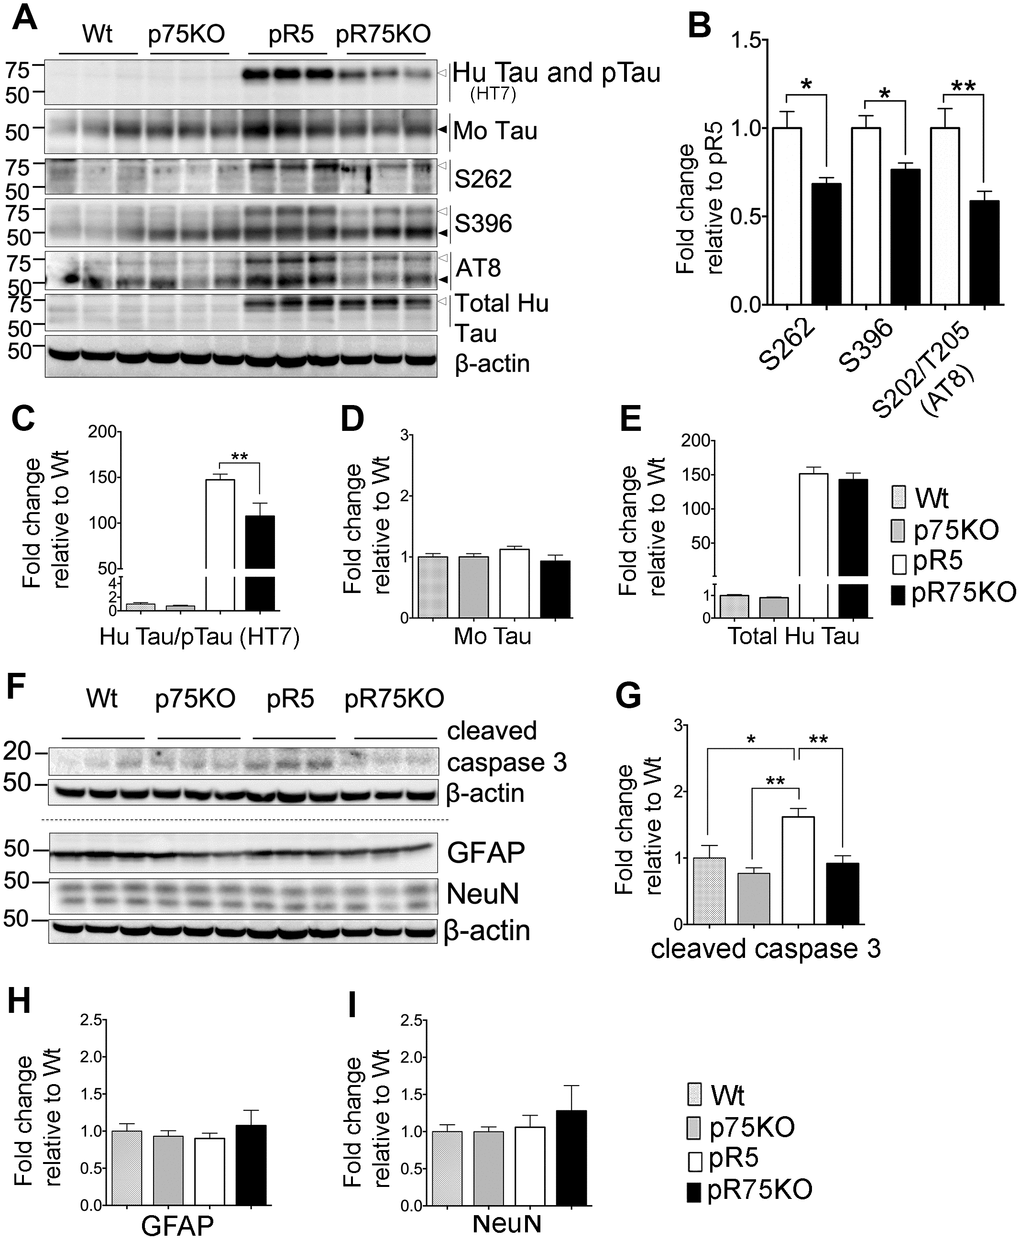 Knock out of p75NTR in pR5 mice attenuated human Tau phosphorylation at 6 months. (A) Protein blots for total Tau, and phosphorylated Tau probed at 75 kDa for human and 50 kDa for mouse protein bands in the forebrains of Wt, p75KO, pR5 and pR75KO mice at 6 months. (B) Protein band intensity quantification of phosphorylated human Tau at S262, S396 and S202/T205 (AT8) in pR5 and pR75KO mice normalised with total human Tau and expressed as fold change relative to pR5. Protein band intensity quantification of total human Tau and pTau detected by HT7 (C), total mouse Tau detected by Tau5 (D), and total human Tau detected by sheep-anti human Tau (E) normalised to β-actin and expressed as fold change relative to Wt. (F) Protein blots of cleaved caspase-3, glial fibrillary acidic protein (GFAP) neuronal nuclei (NeuN). Protein band intensity quantification of cleaved caspase-3 (G), GFAP (H), and NeuN (I) normalised with their respective total β-actin and expressed as fold change relative to Wt. Data are represented as the mean ± SEM, n=6. Statistical comparisons were performed using one-way ANOVA and Tukey’s test. For human pTau, two-tailed unpaired t-test was used to compare pR5 and pR75KO mice. Statistical significance: *P.